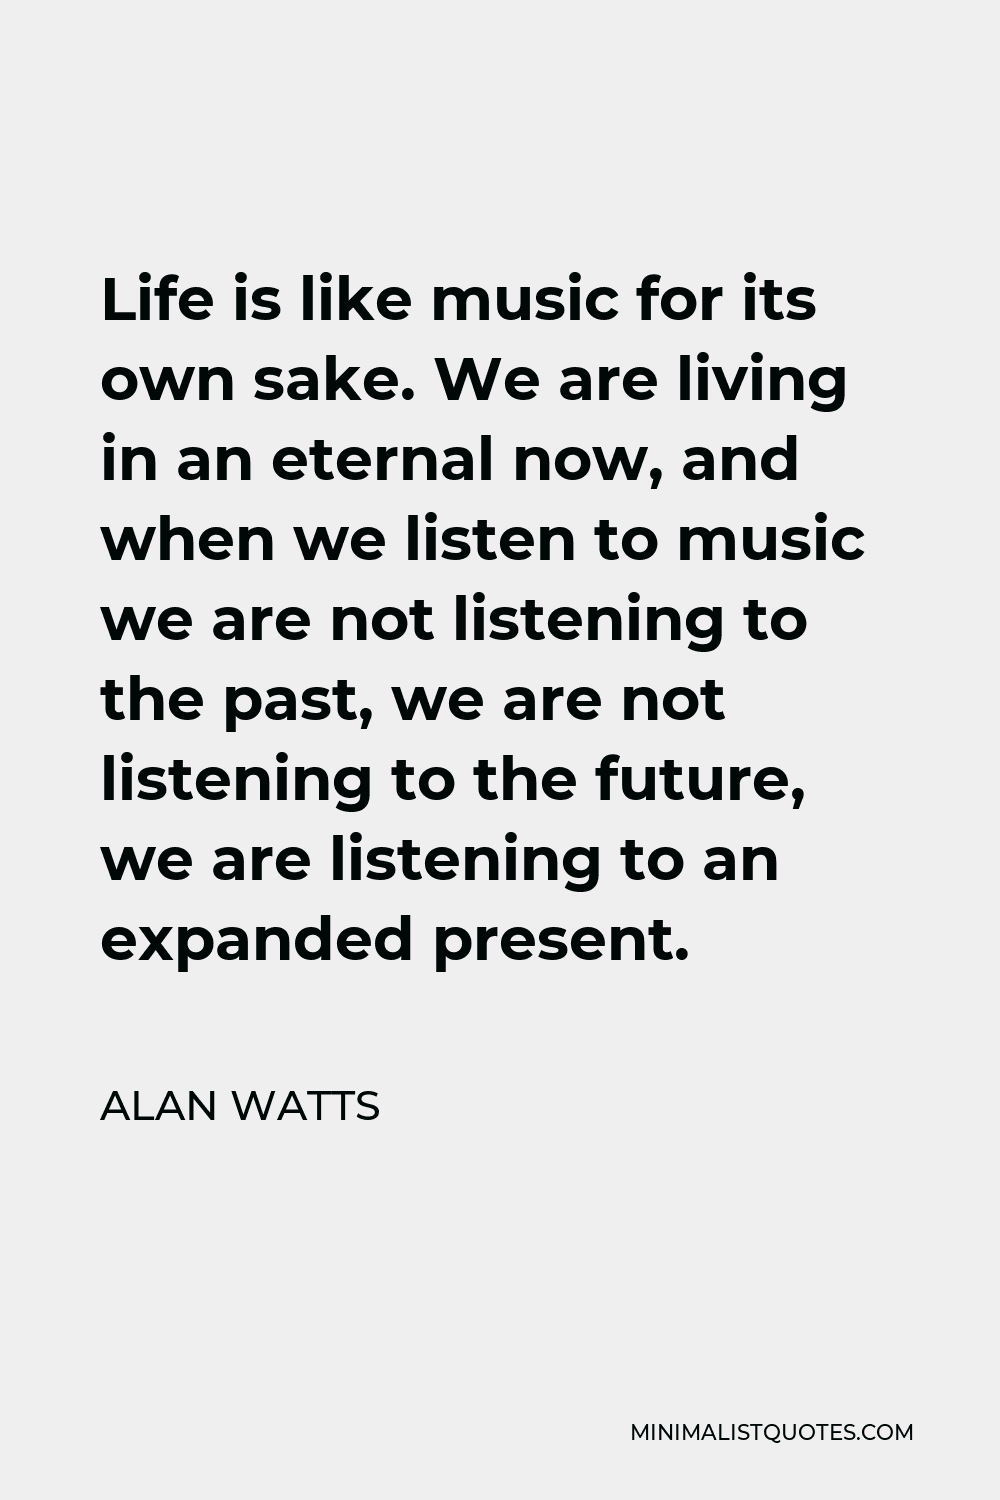 Alan Watts Quote - Life is like music for its own sake. We are living in an eternal now, and when we listen to music we are not listening to the past, we are not listening to the future, we are listening to an expanded present.